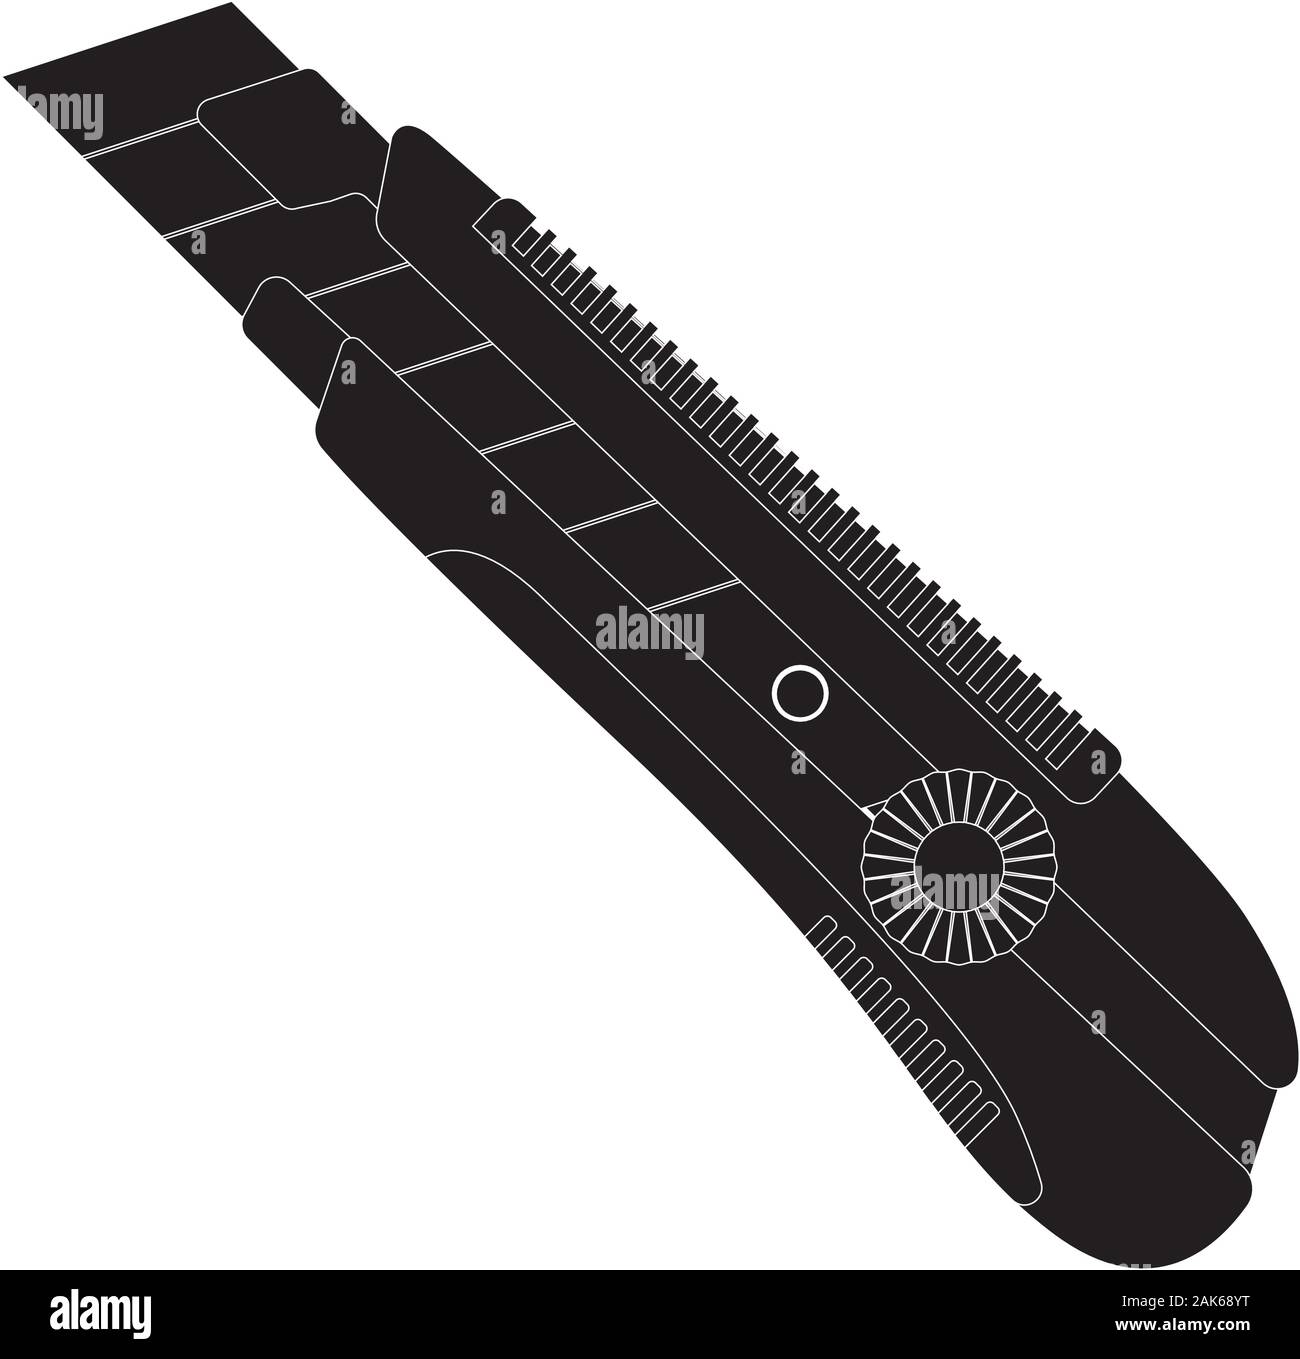 Cutting knife Stock Vector